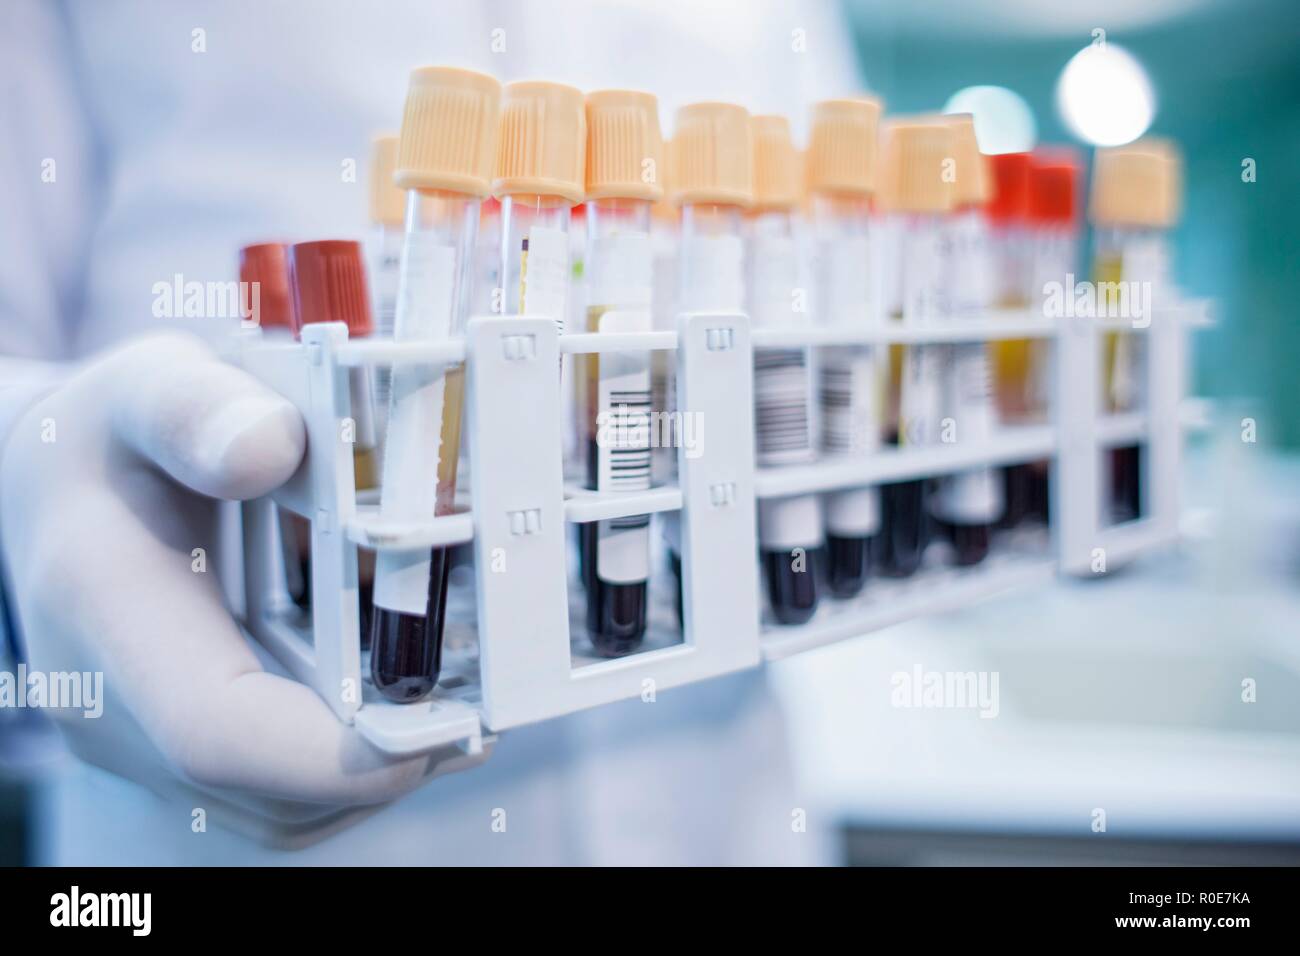 Laboratory assistant holding medical samples in rack, close up. Stock Photo